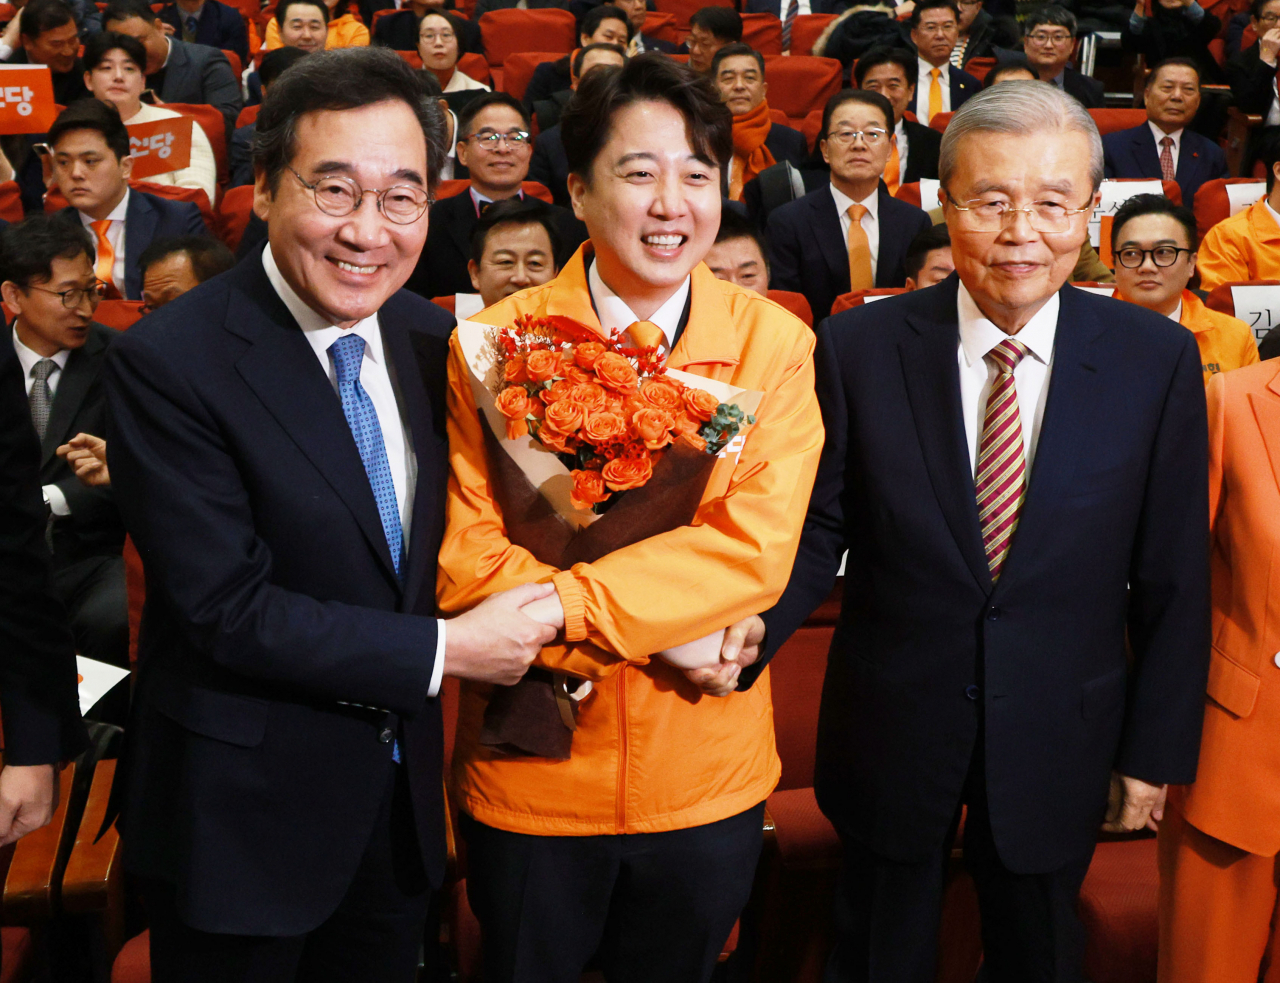 Former Prime Minister Lee Nak-yon, right, and former People Power Poarty Interim Leader Kim Chong-in, left, shakes hands with ex-People Power Party leader Lee Jun-seok as they congratulate him on launching his new political party in a celebration held at the National Assembly on Saturday. (Yonhap)